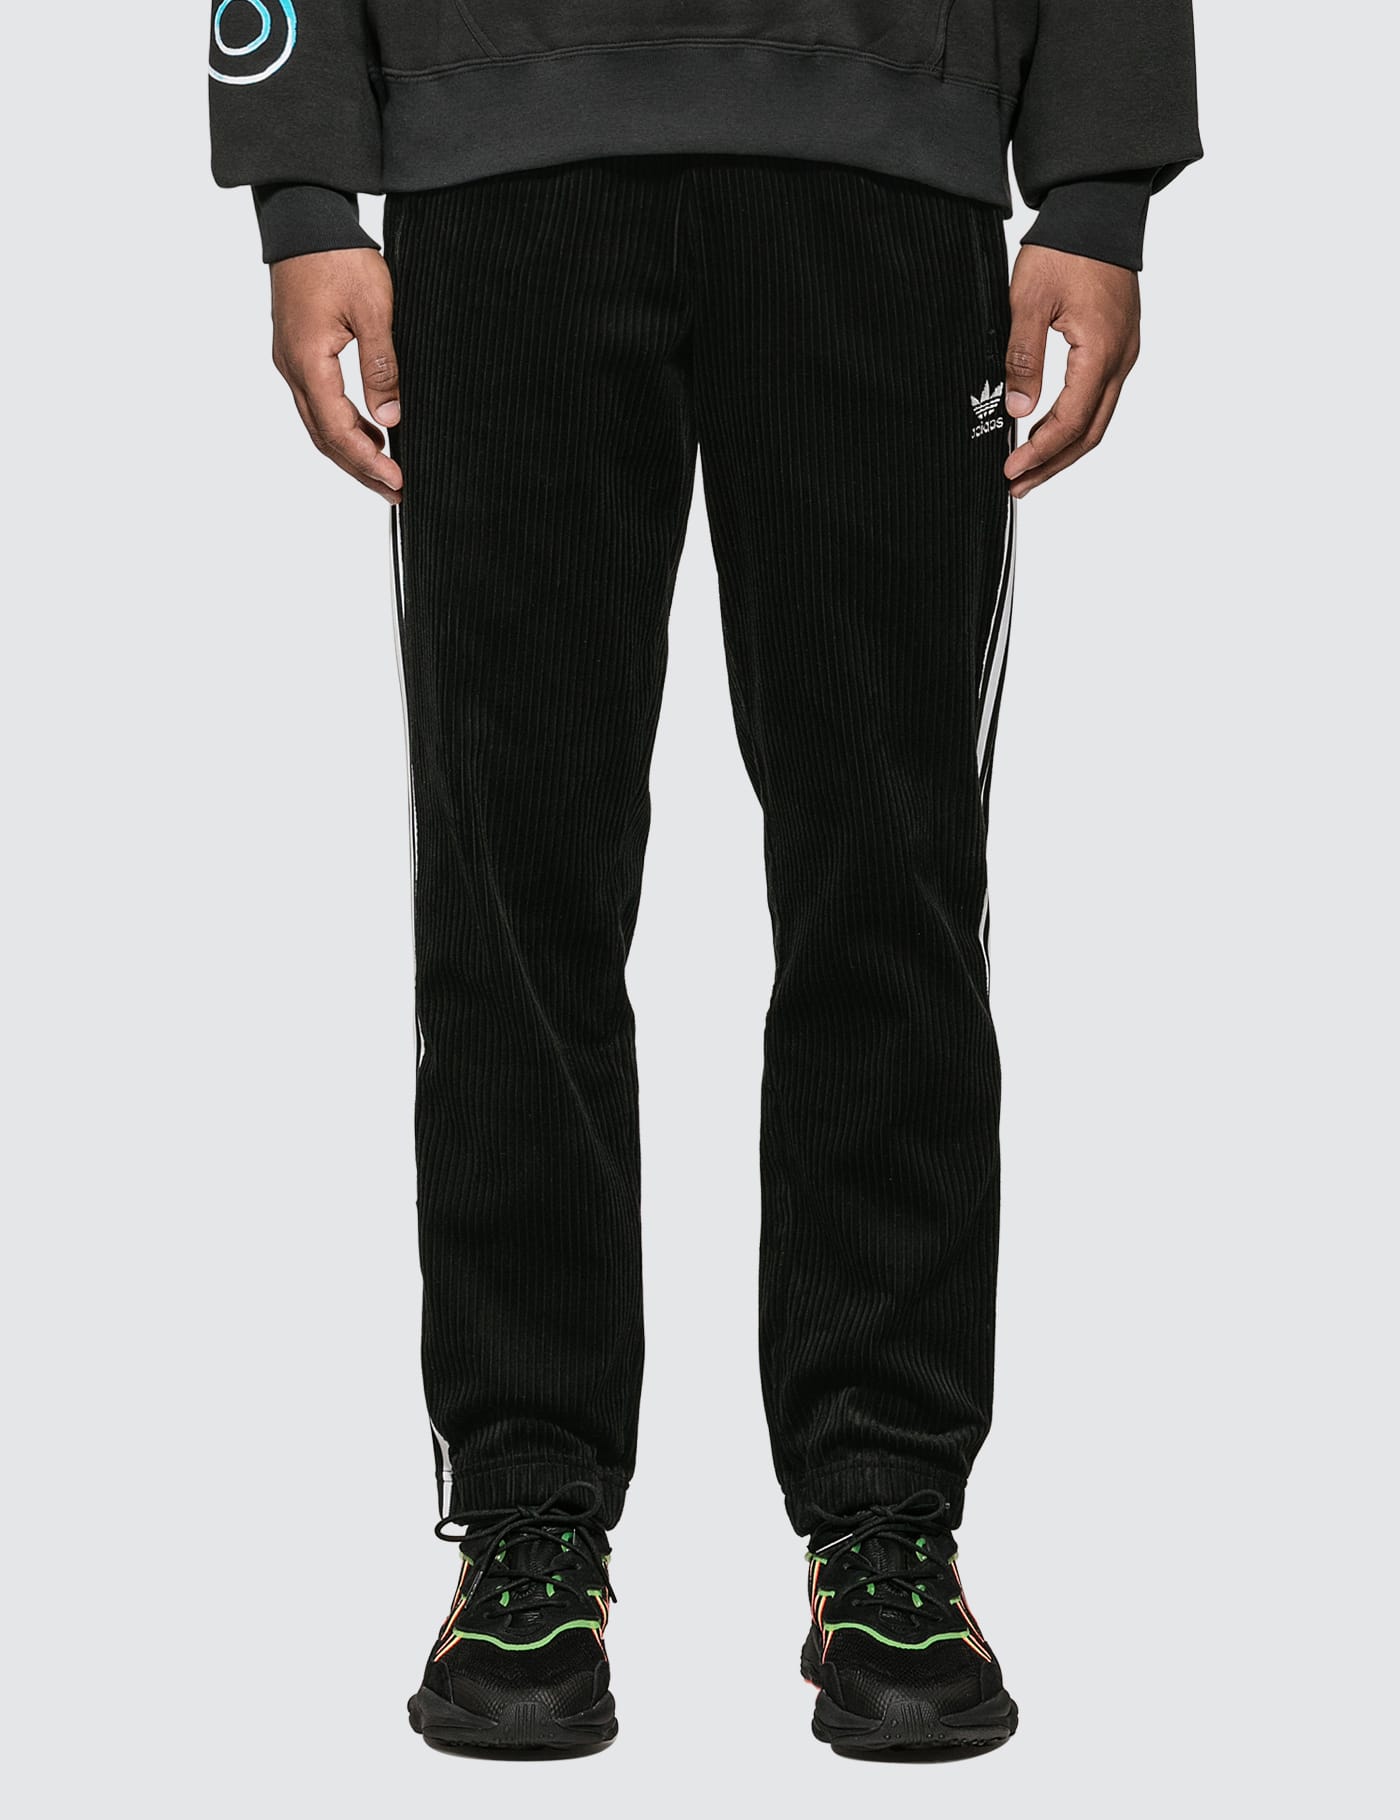 adidas track pants with zipper